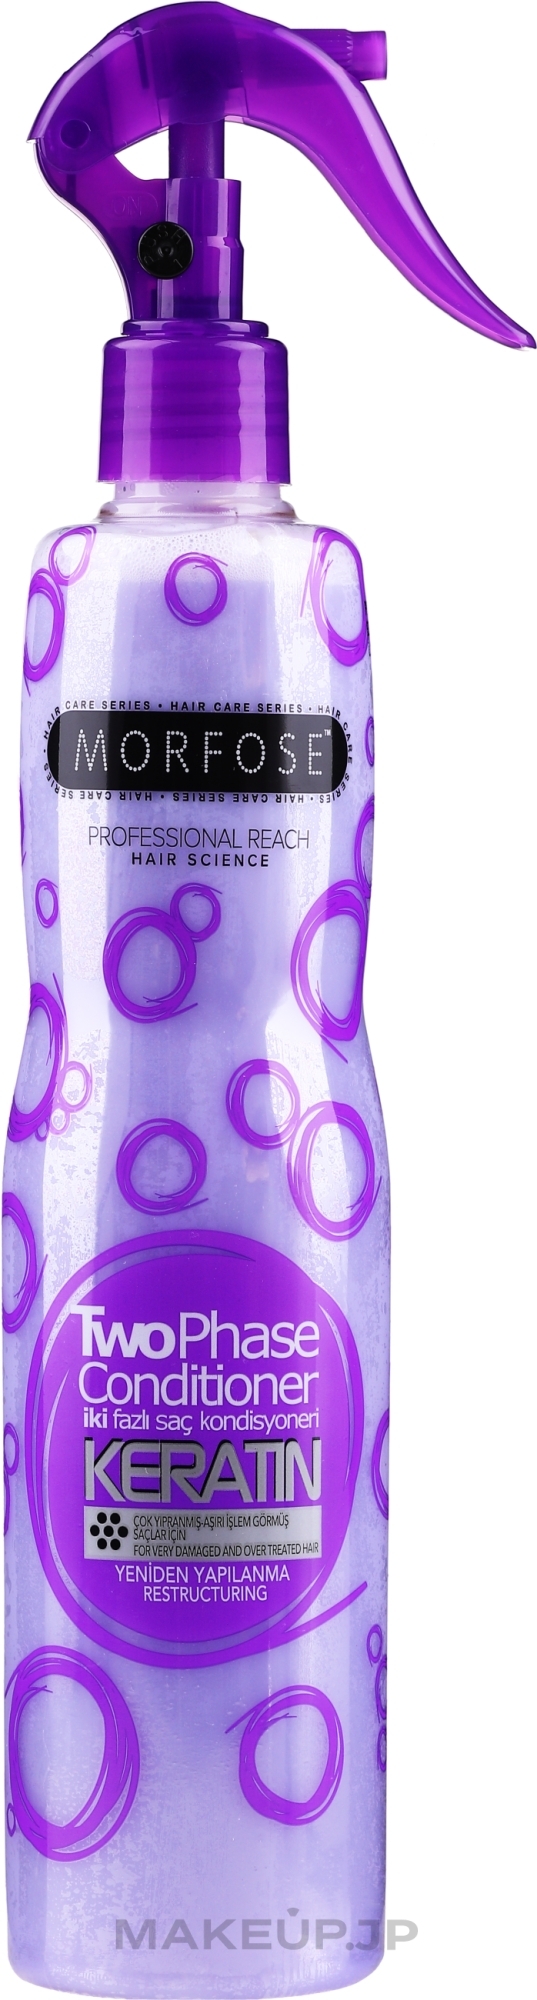 2-Phase Hair Conditioner - Morfose Buble Keratin Conditioner — photo 400 ml